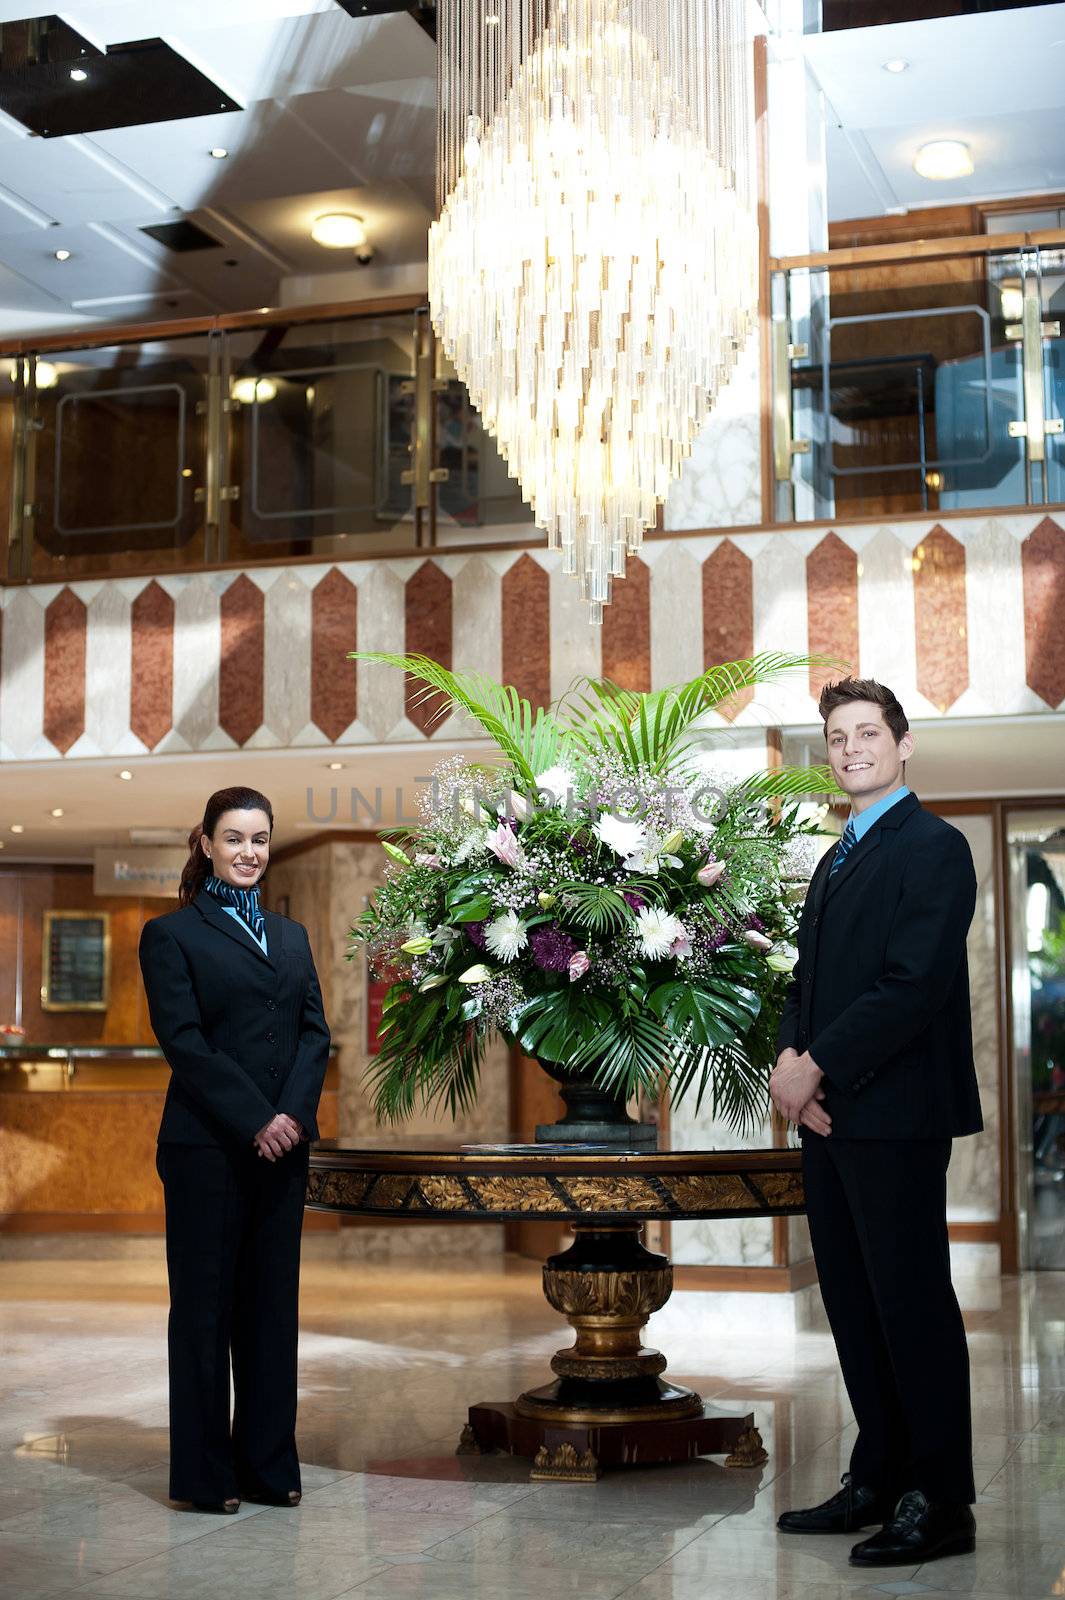 Smartly dressed front office executives posing under a chandler with flower vase as a centerpiece